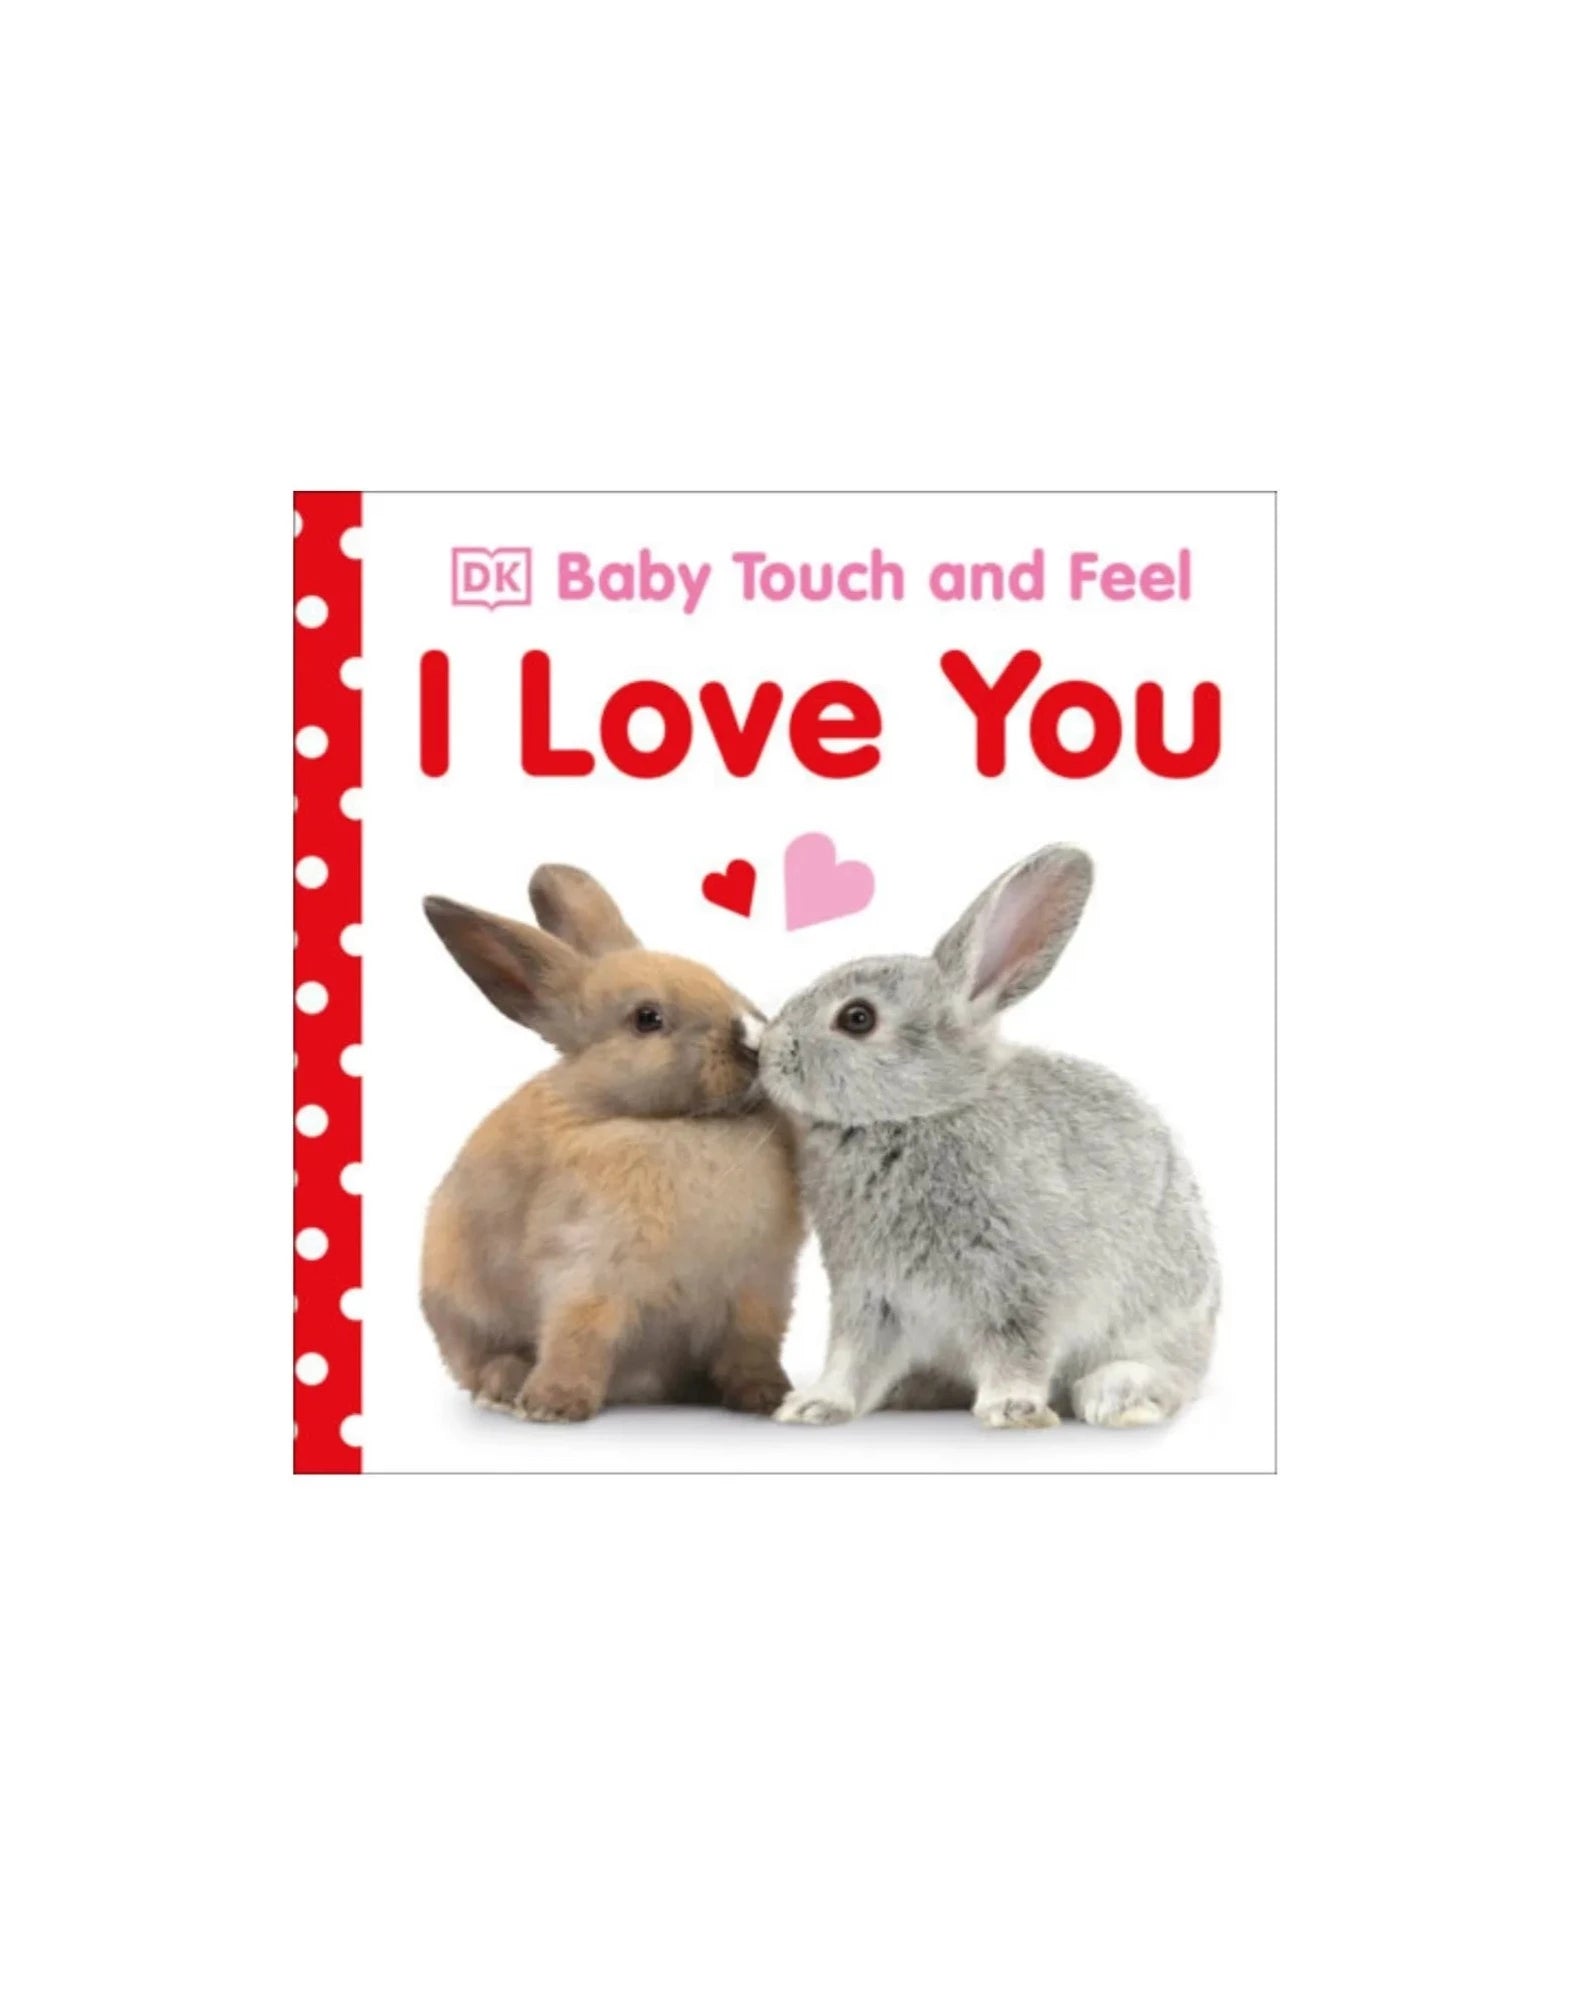 Baby Touch and Feel I Love You book cover showing two bunnies kissing